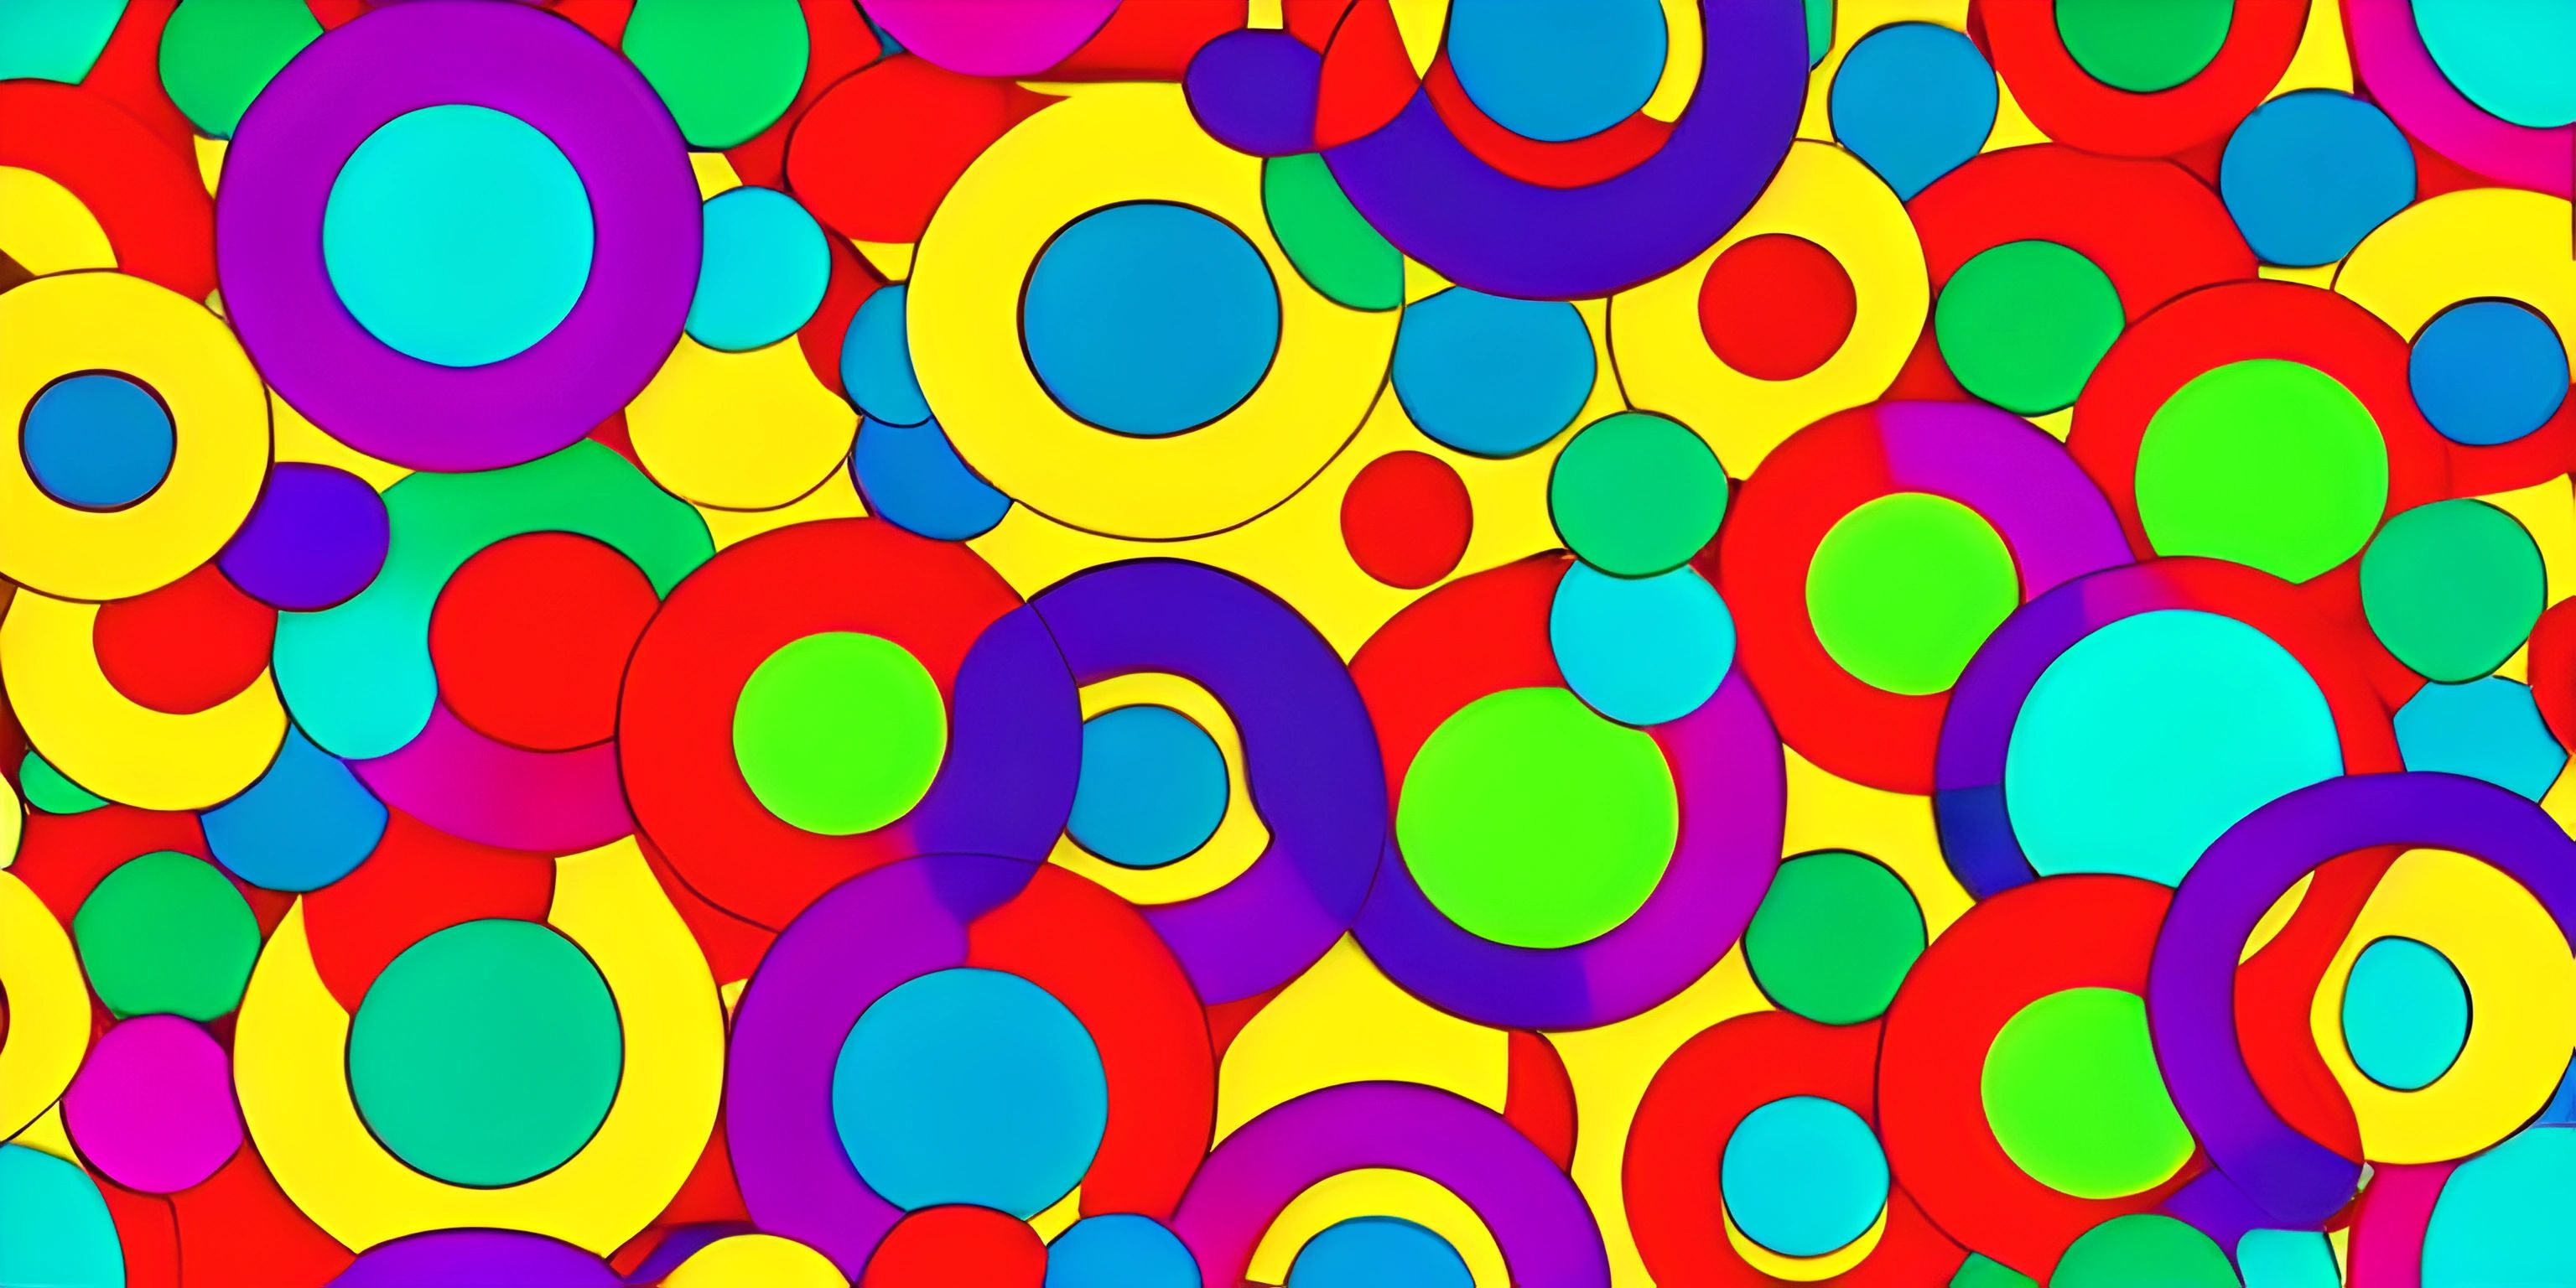 a colorful abstract design with various colors and shapes on it - in a multi - color pattern, including circles and lines